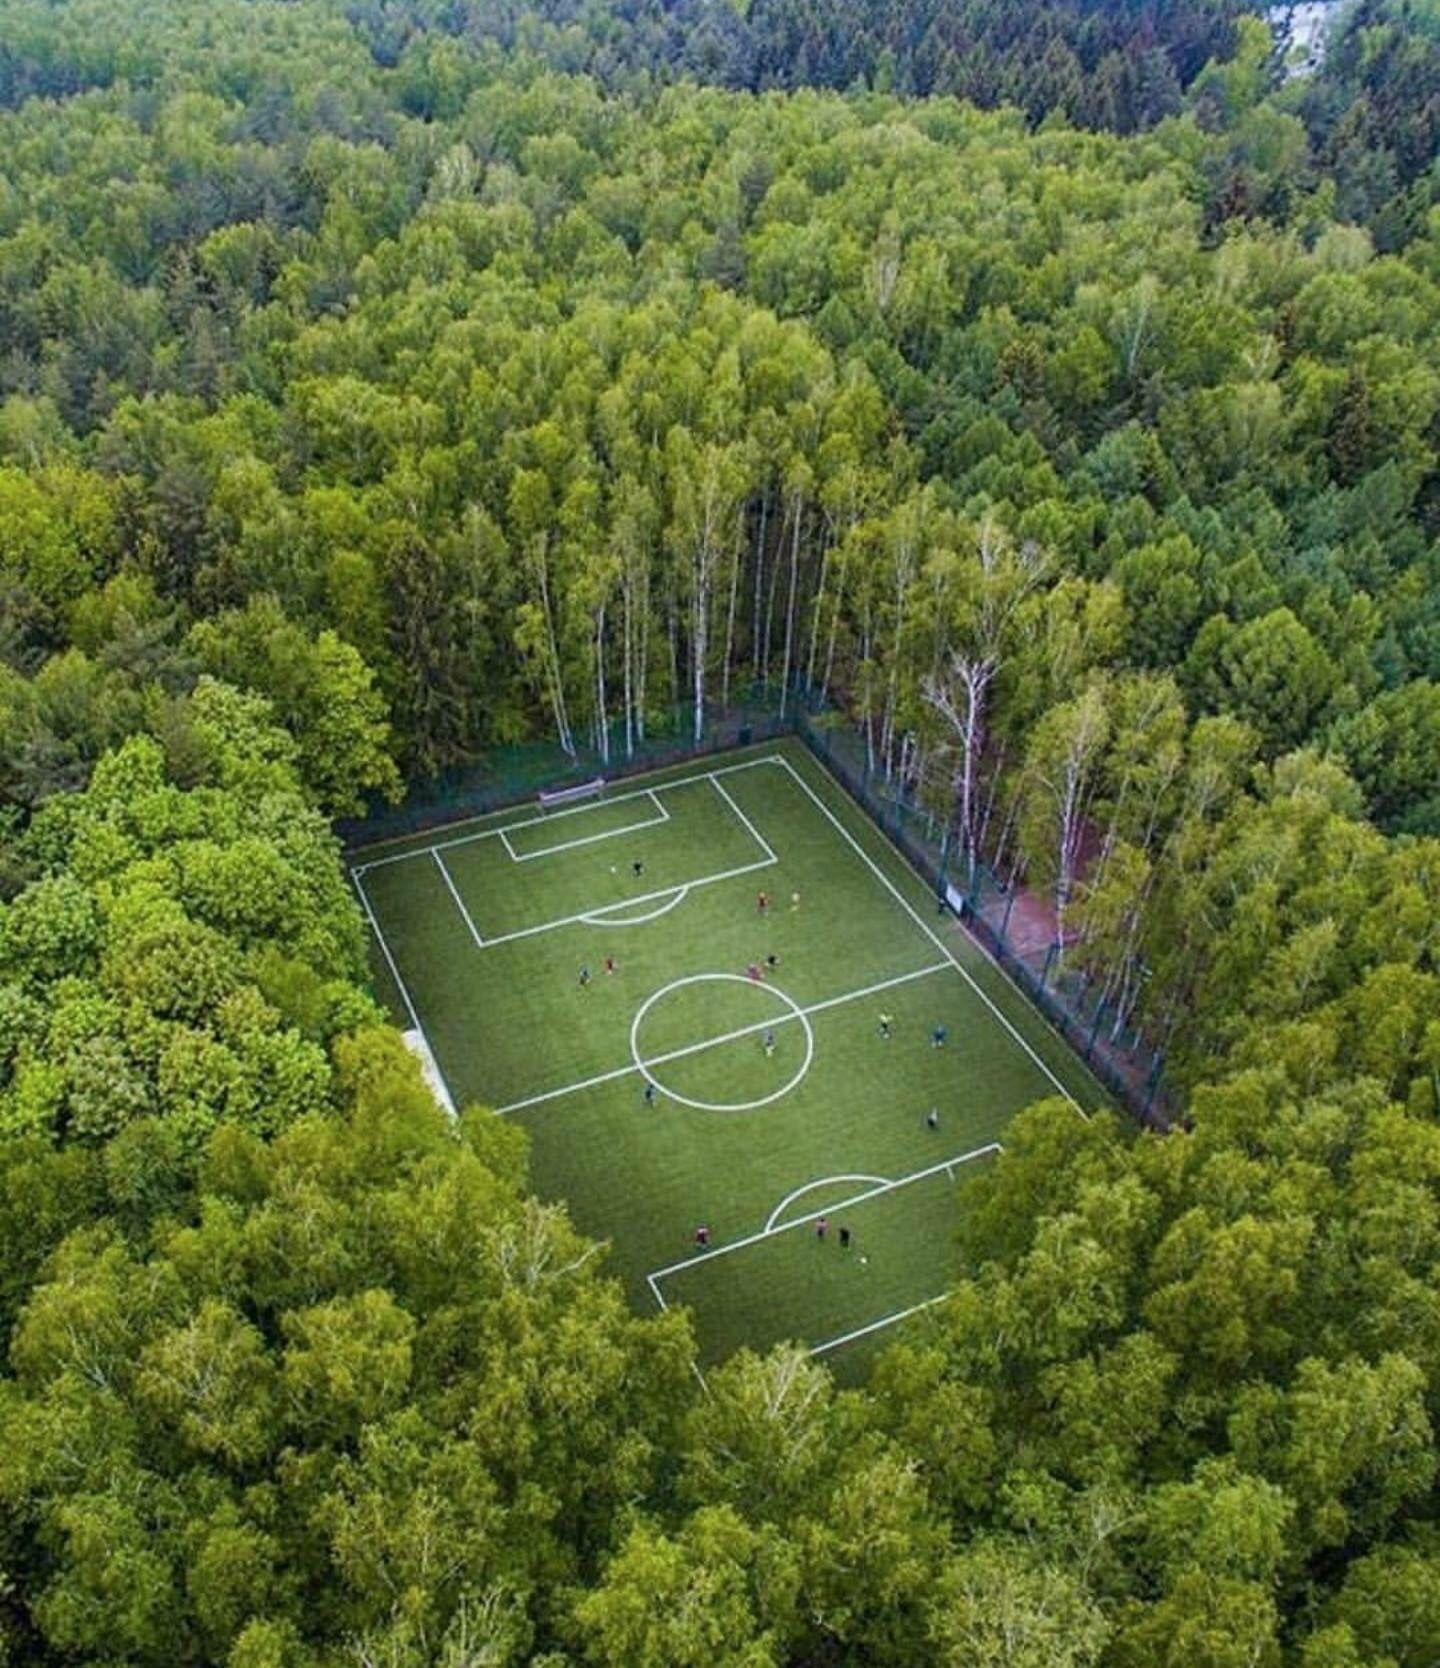 Footy+in+the+forrest.